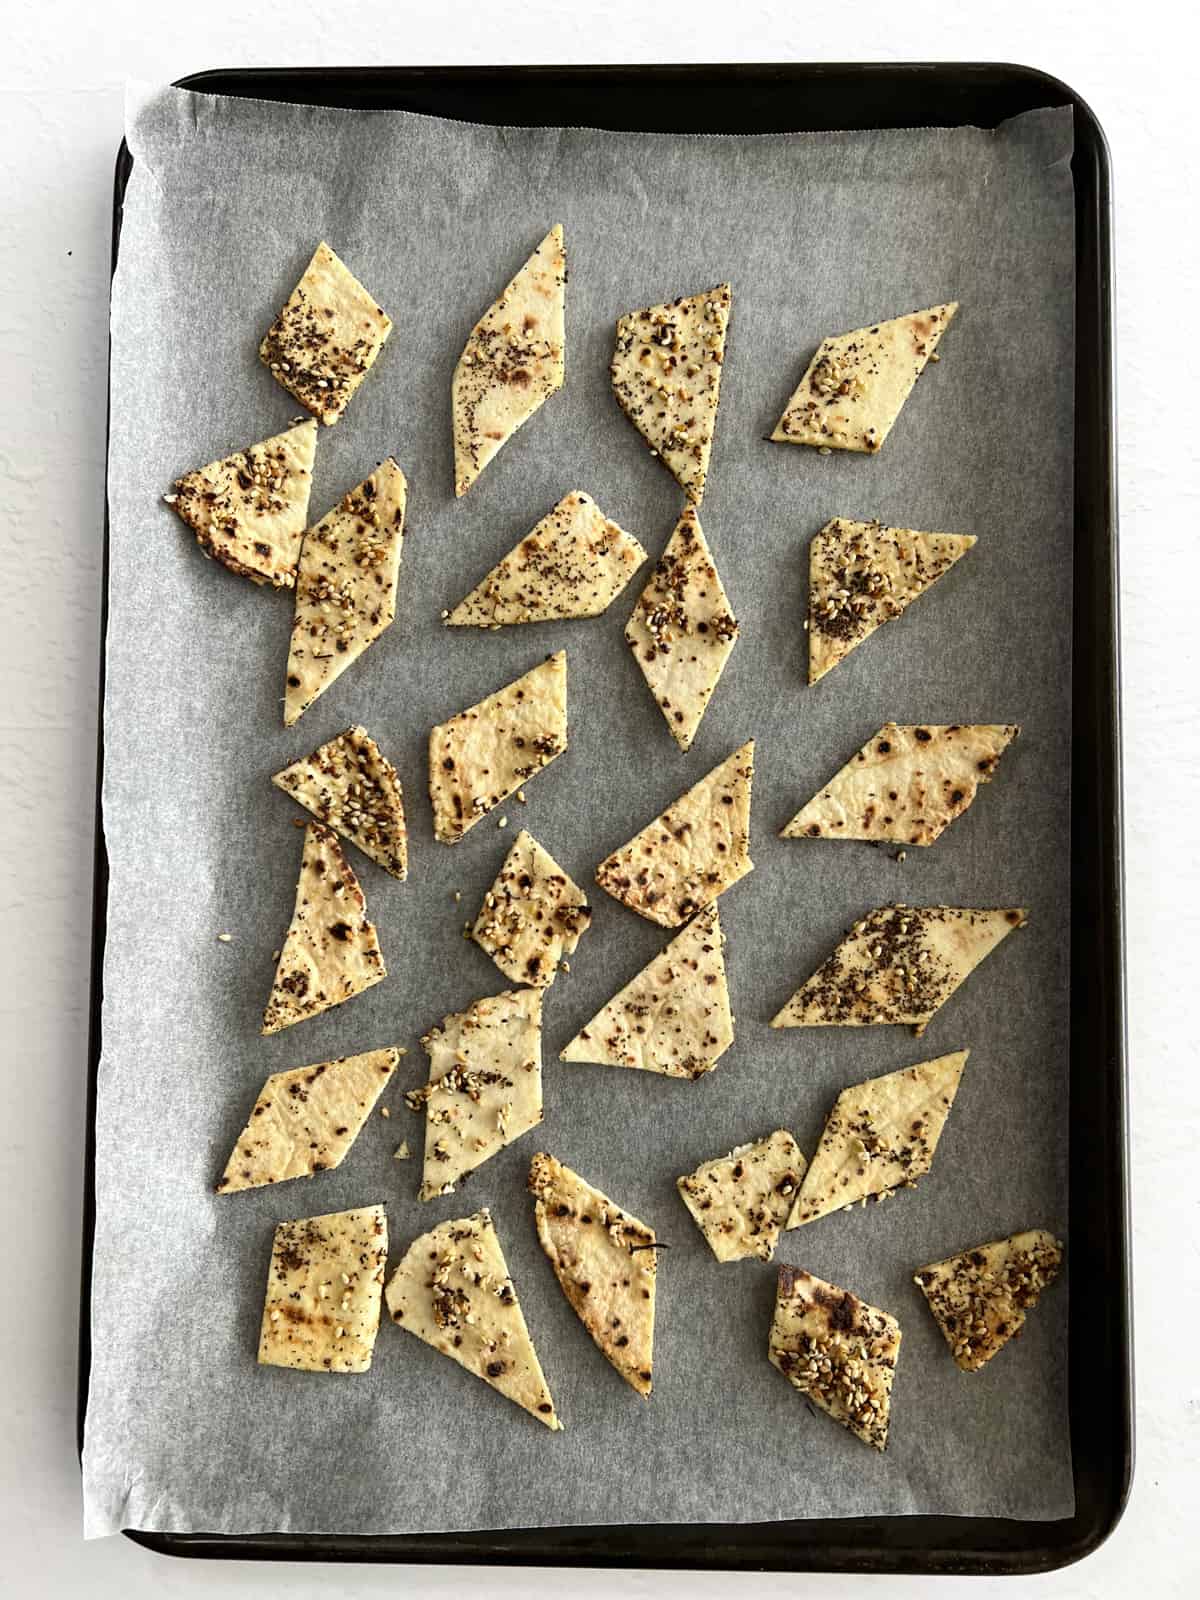 unbaked seasoned pita bread pieces on a white paper lined baking tray